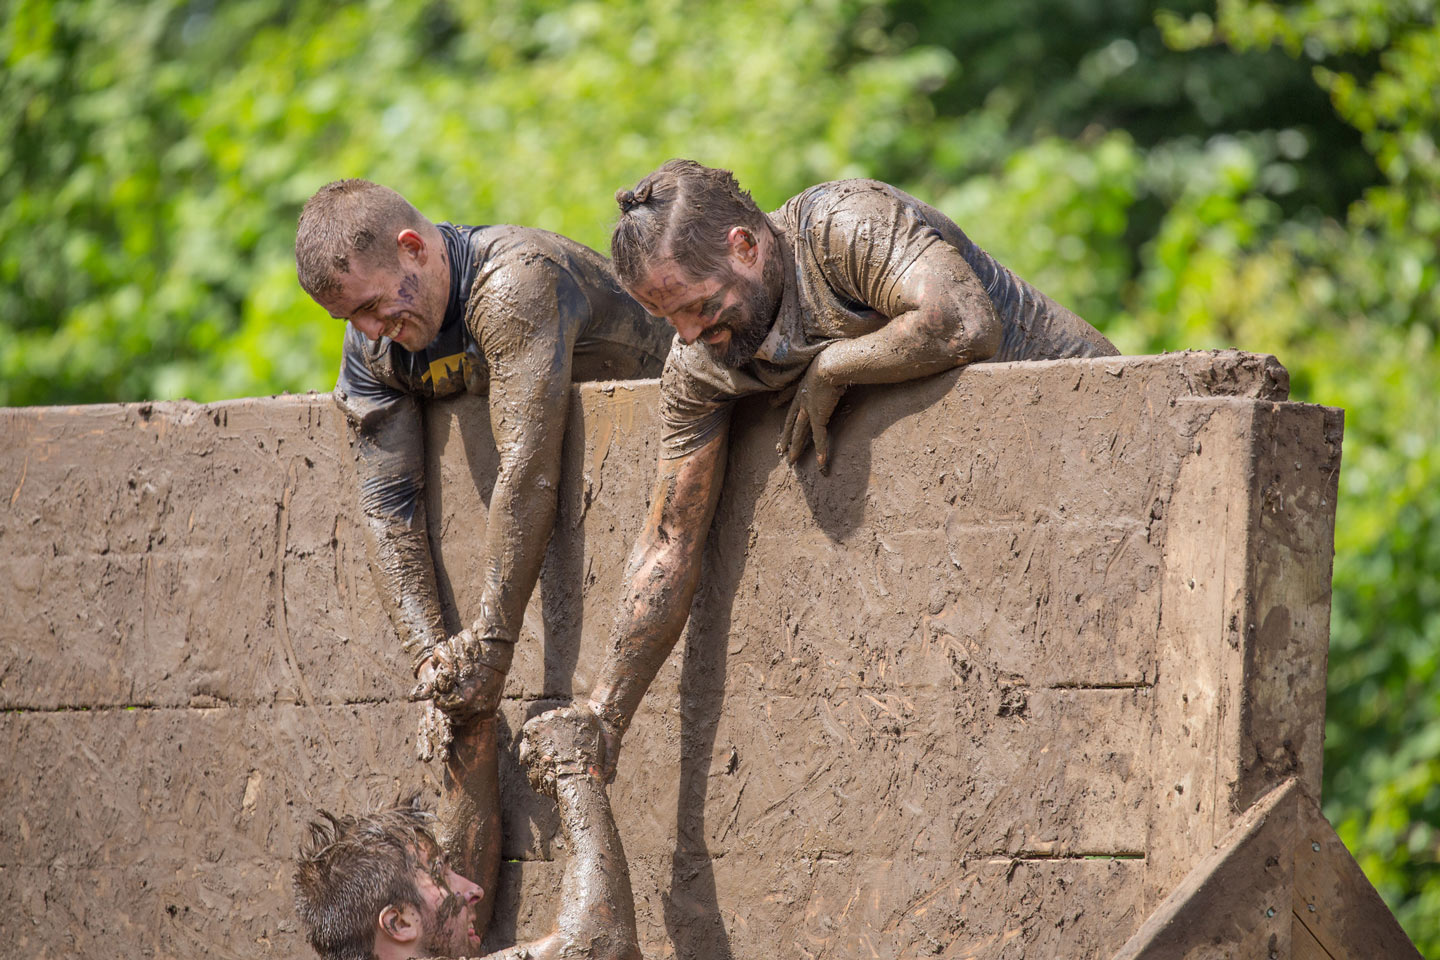 Two men pulling up another man over an obstacle wall at a charity walk or fitness event